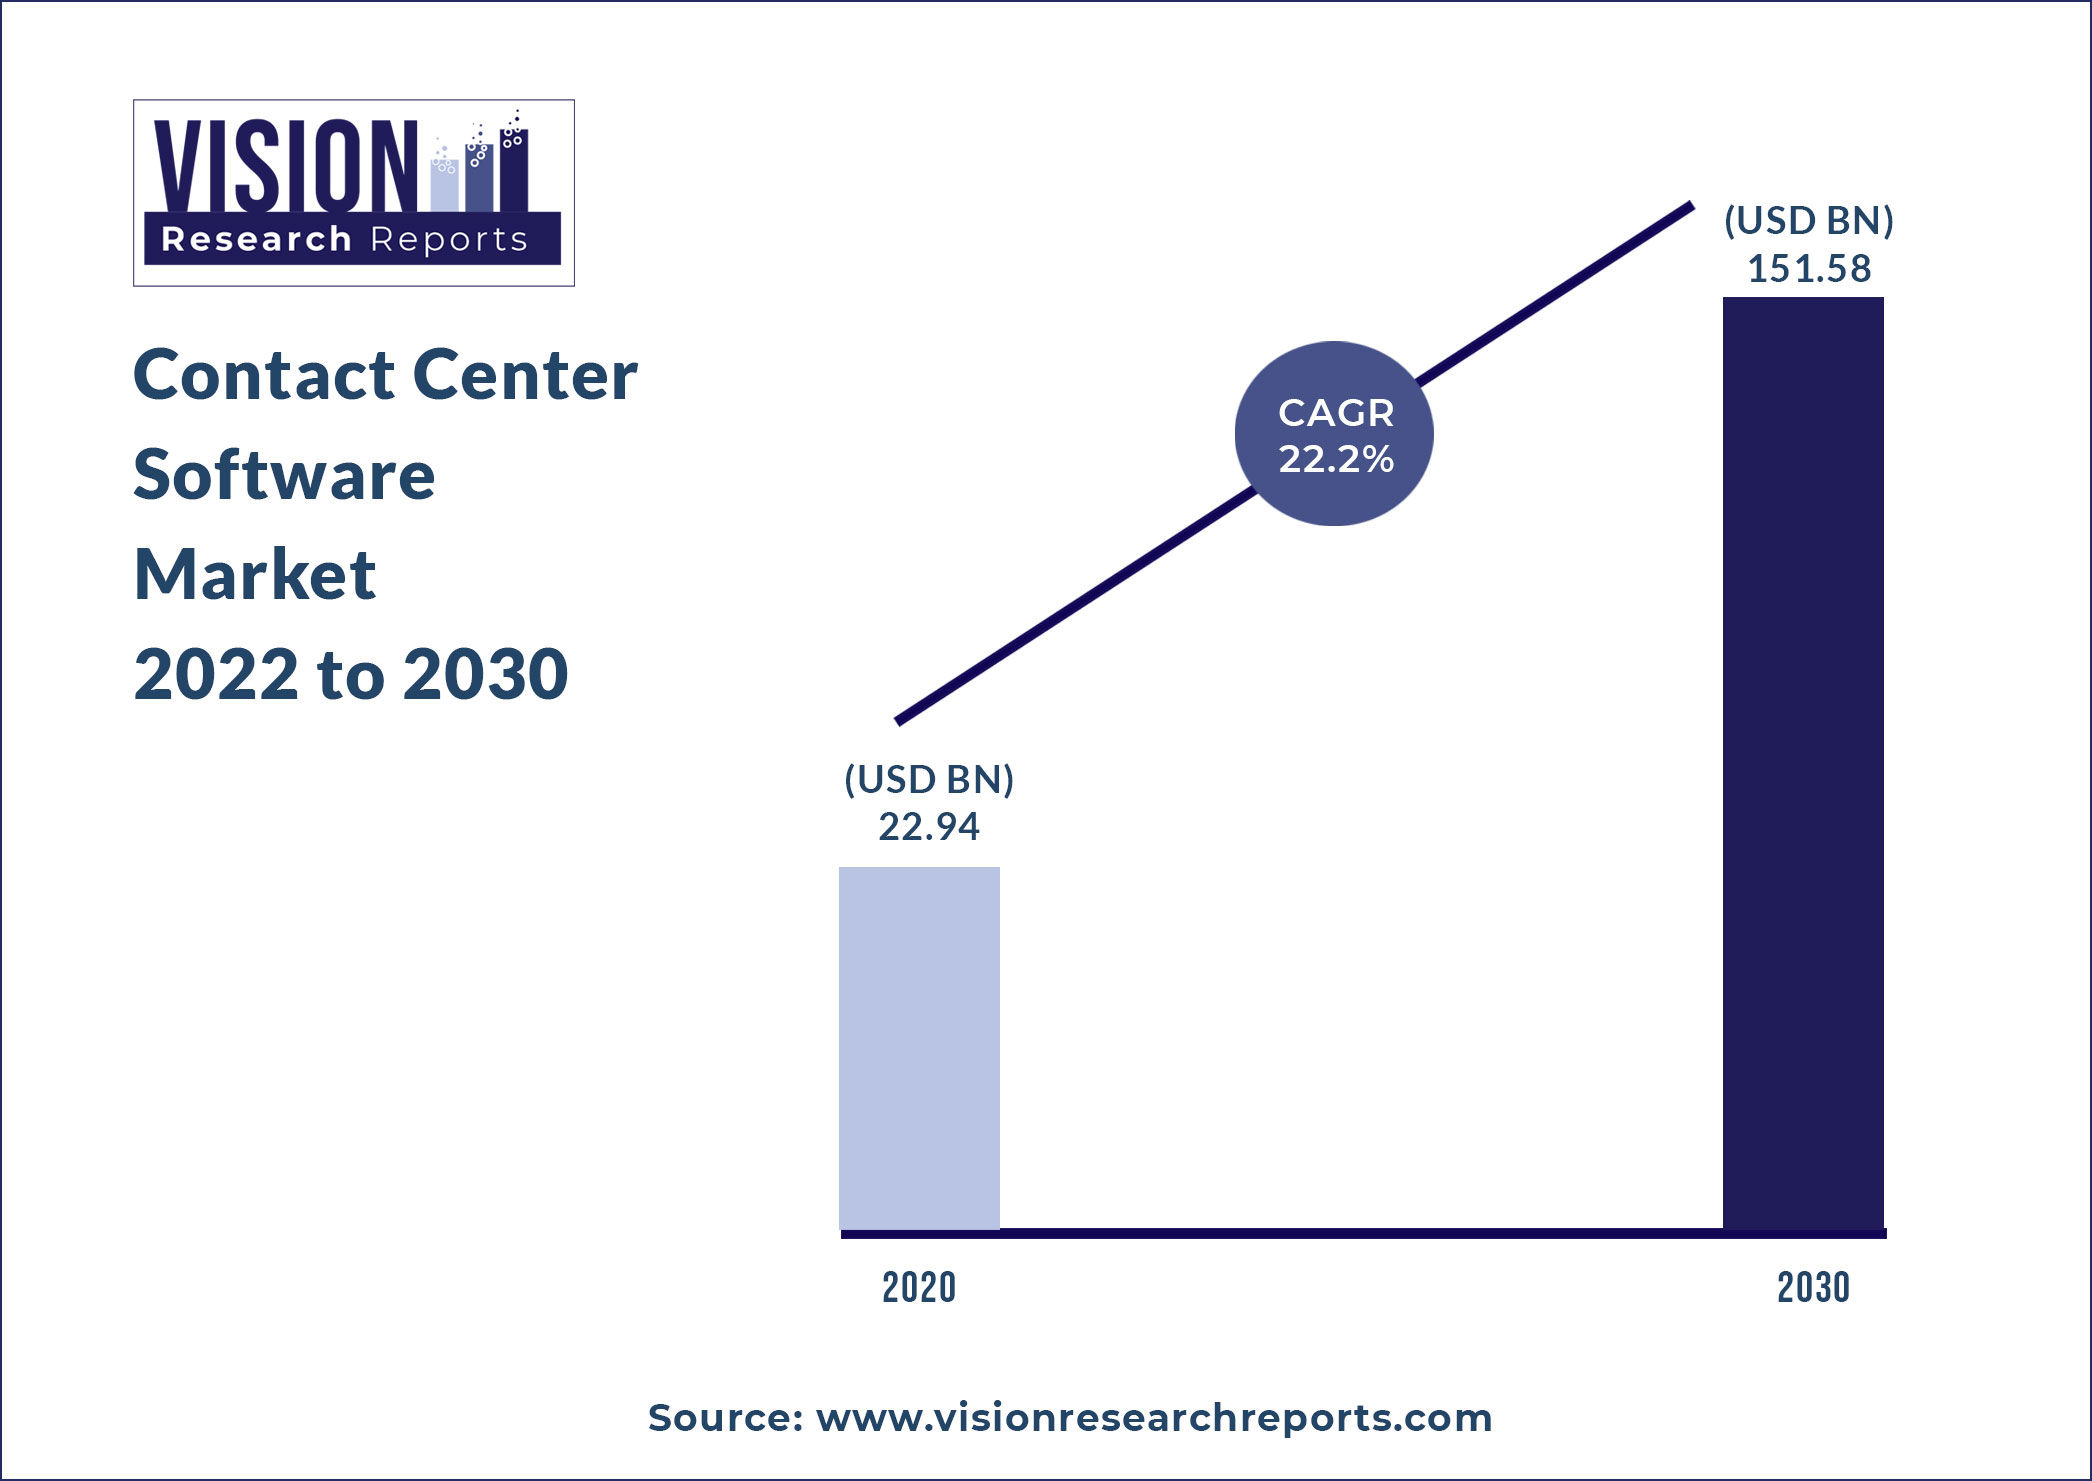 Contact Center Software Market Size 2022 to 2030